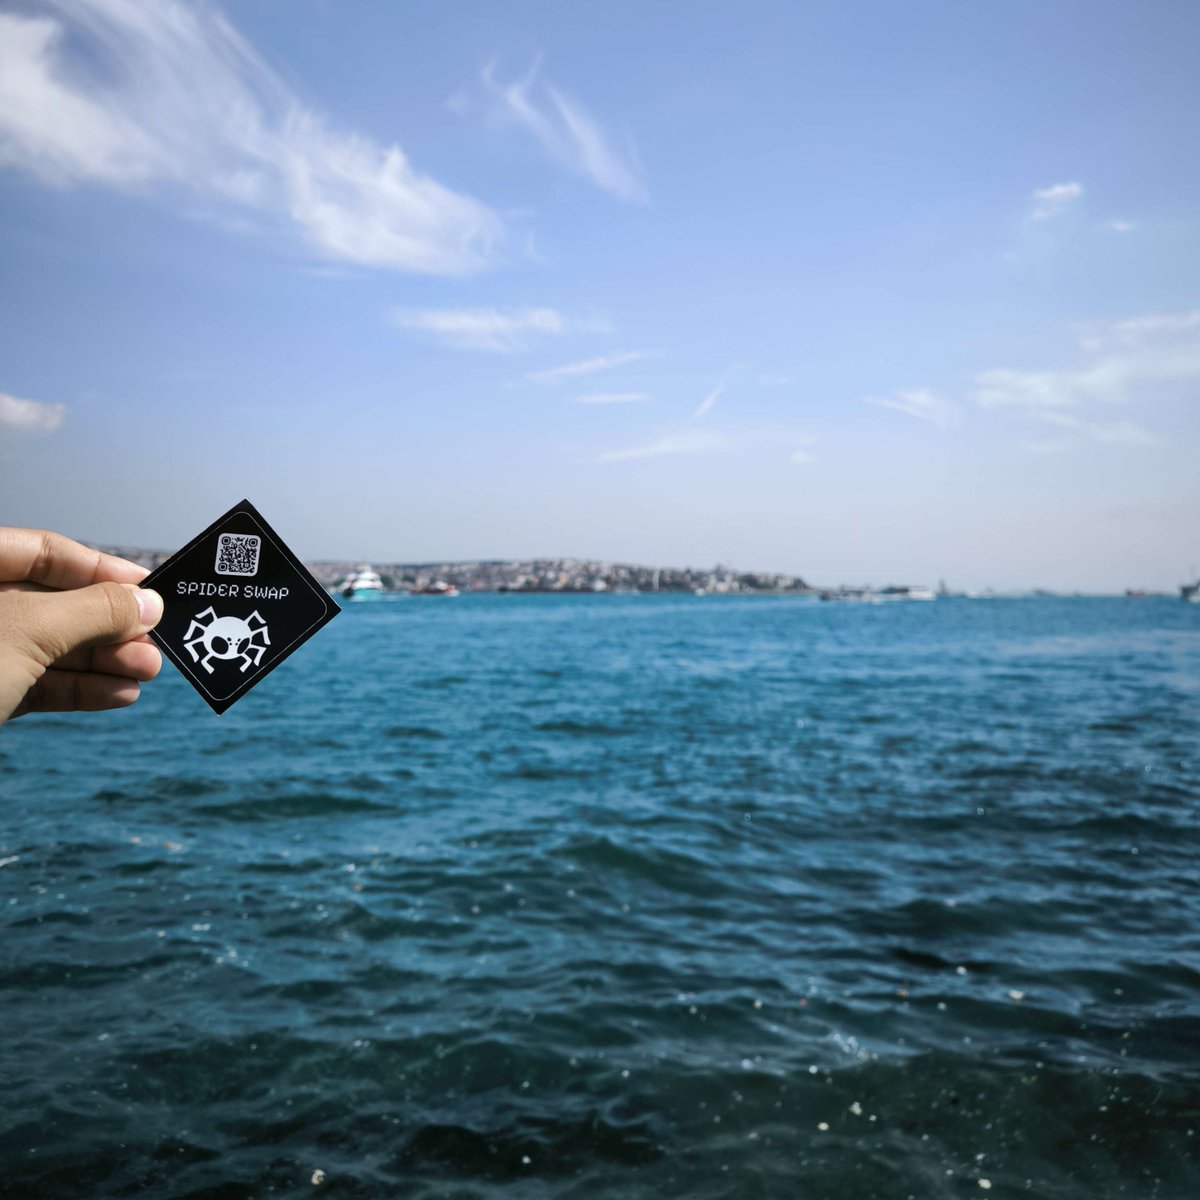 Gm, Enjoying the last day in Istanbul, by the bluest sea of Marmara. Loved @SolanaCrossroad and it was great meeting all of you! Spiderswap will travel next to @nextblockexpo in Warsaw 15th-16th May. Are you coming? Drop a comment and lets meet!